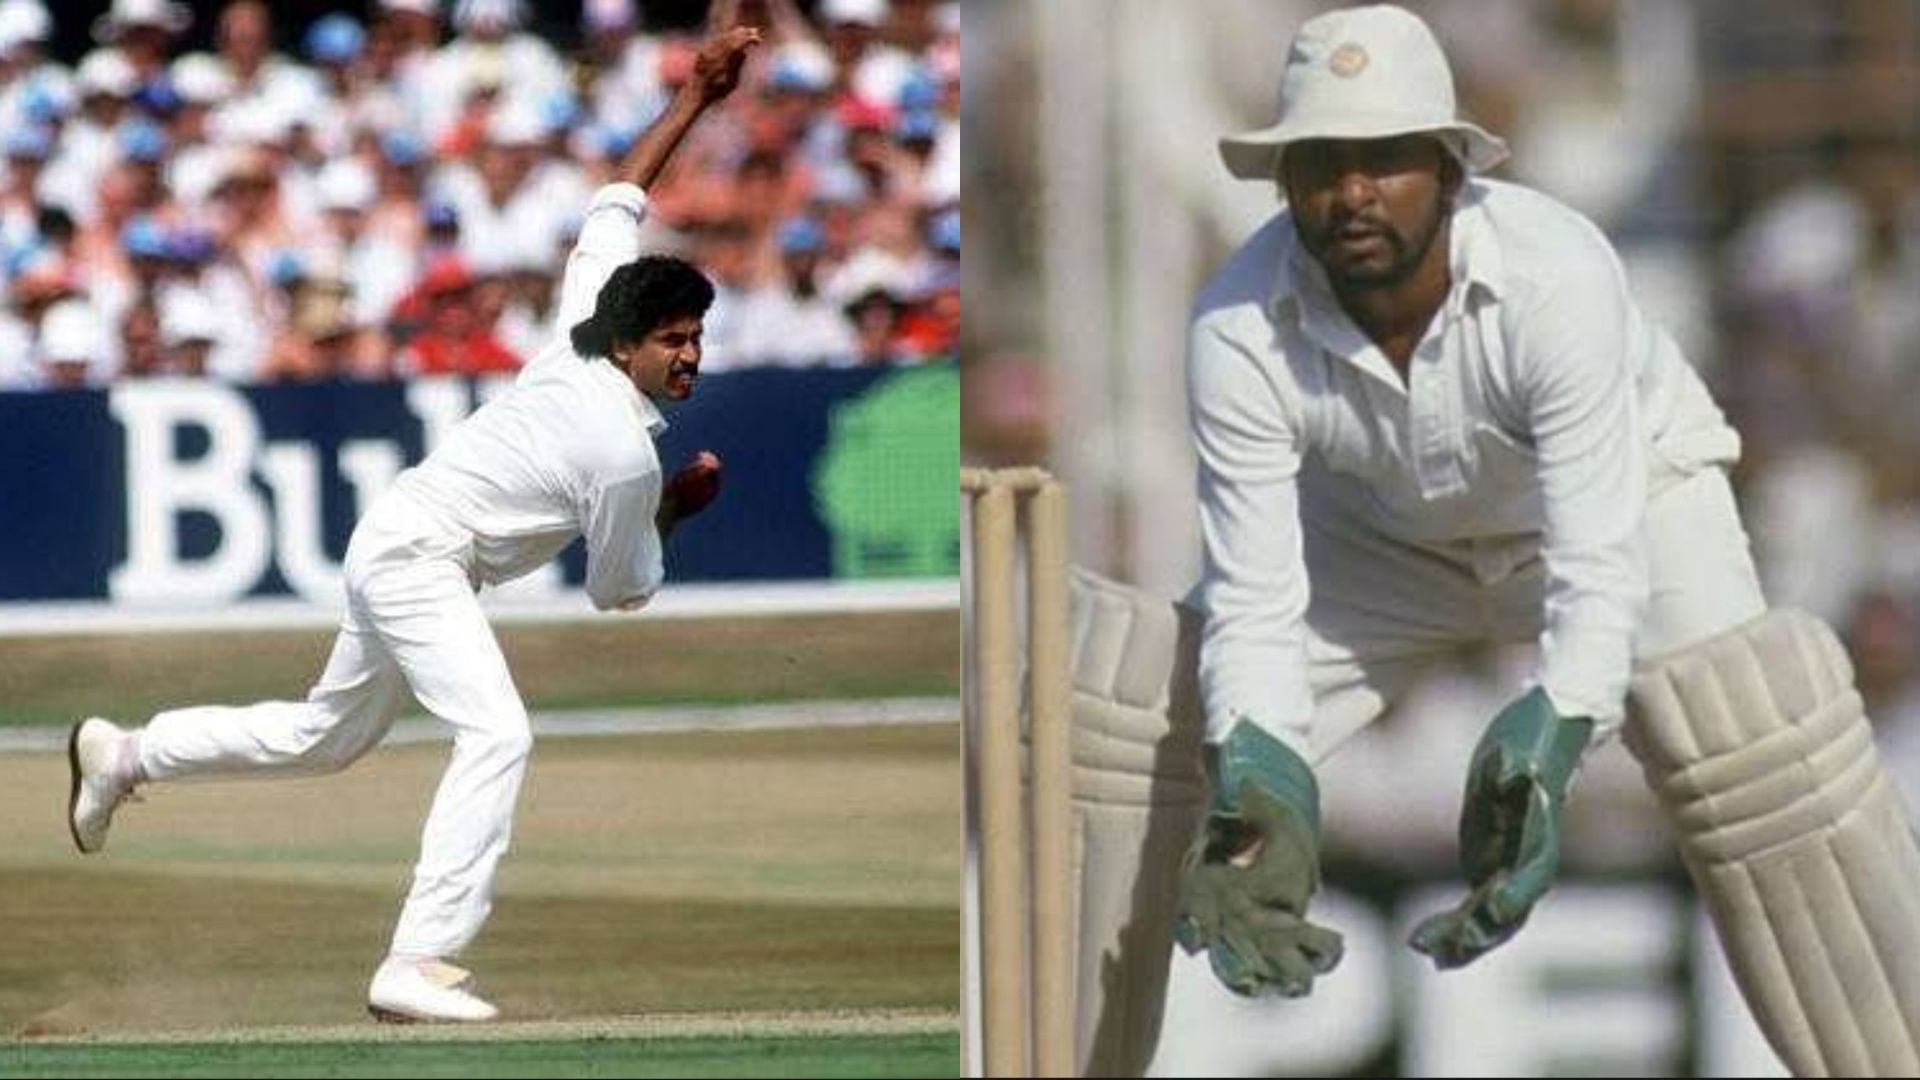 1983 World Cup heroes Kapil Dev and Syed Kirmani hold an all-time Cricket World Cup to date